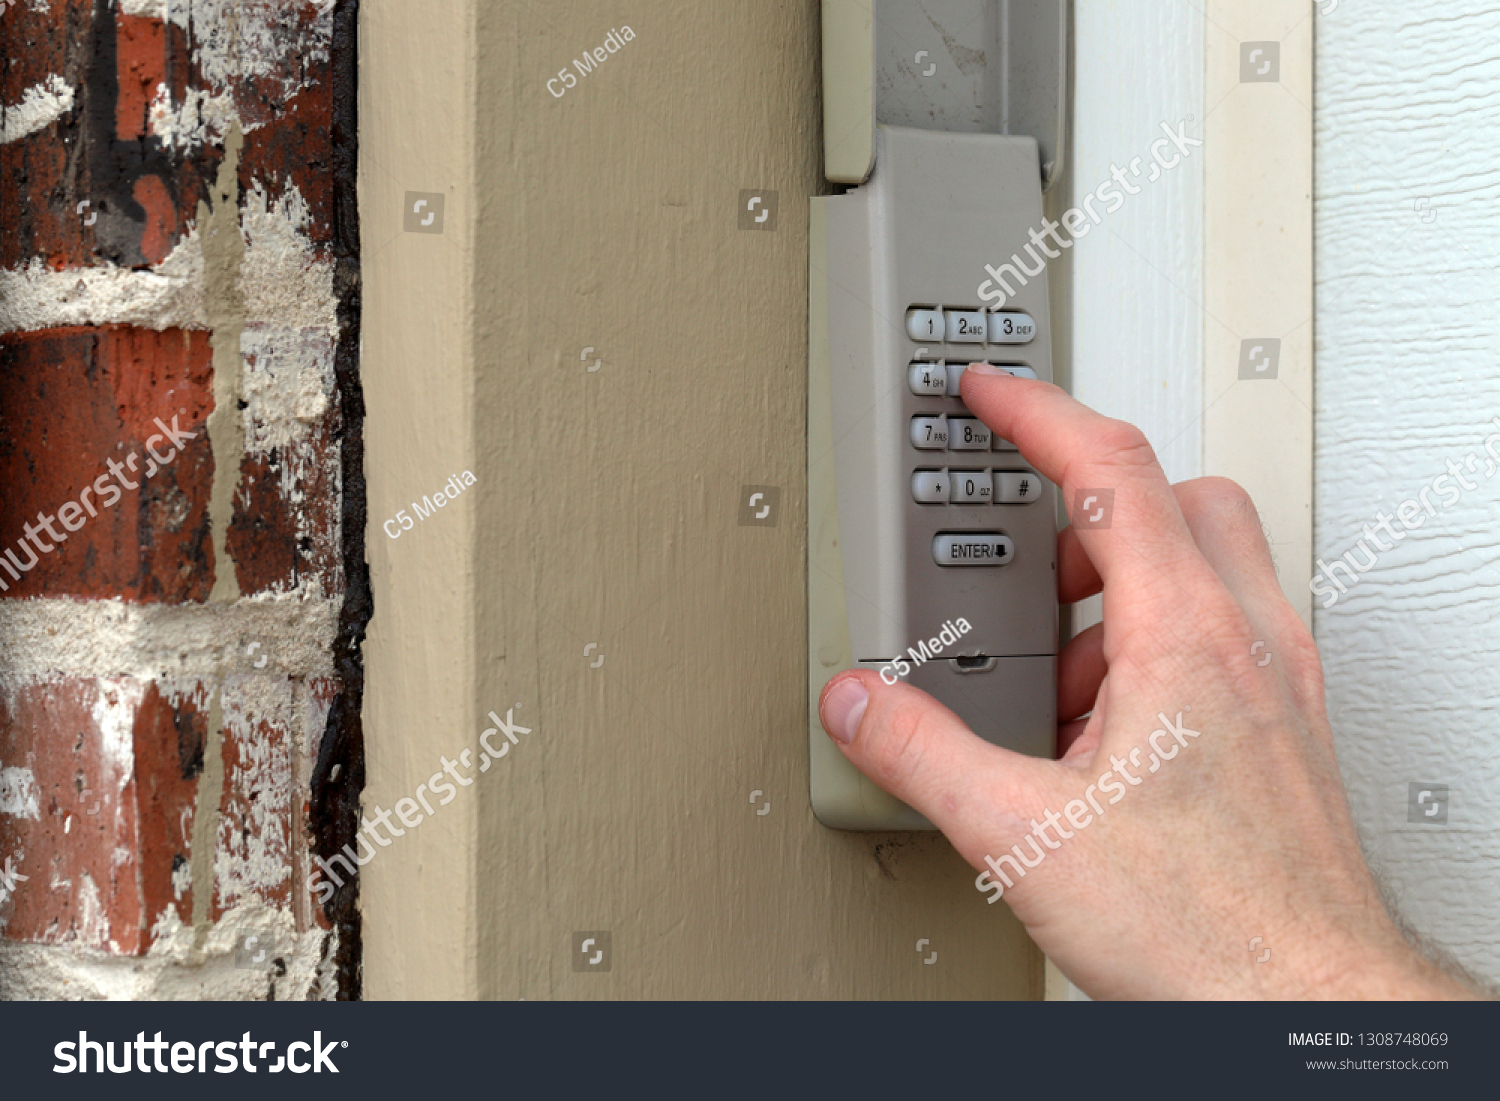 finger entering code on Keypad used on a garage door entrance to a home - security keypad - security code #1308748069